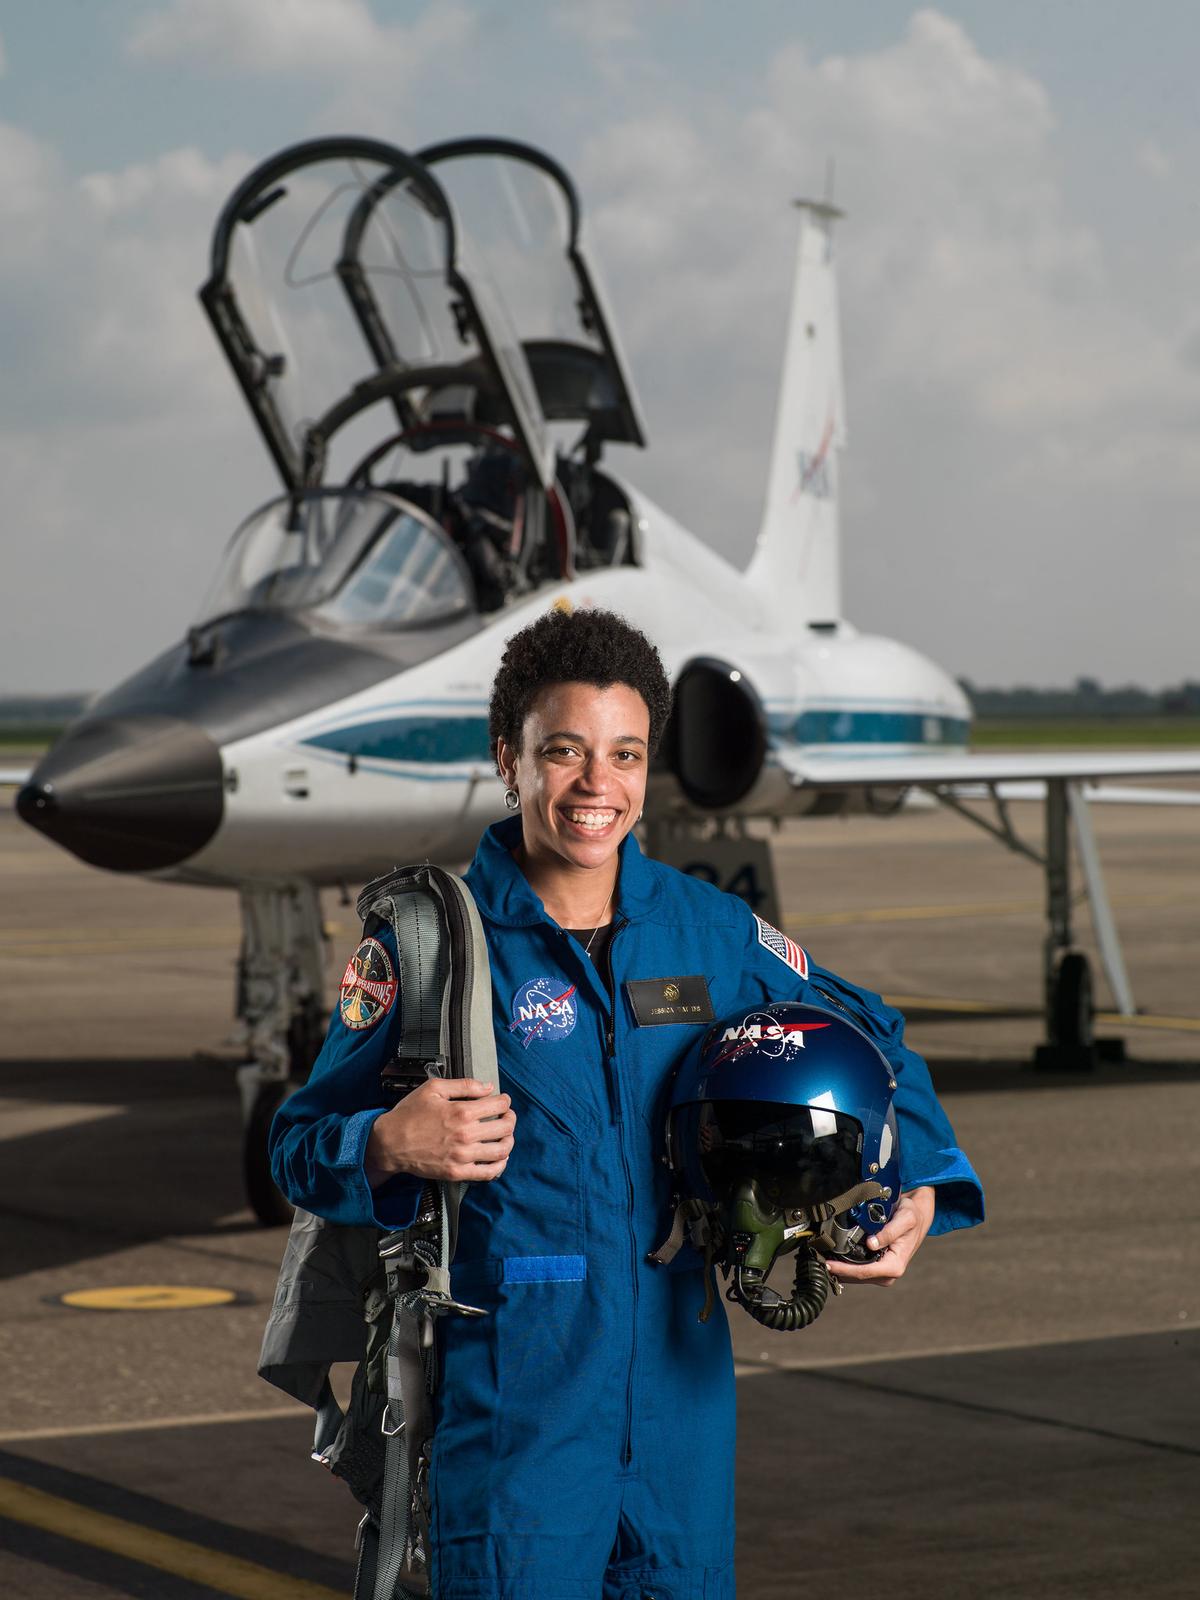 NASA astronaut candidate Jessica Watkins pictured at Ellington Field Joint Reserve Base in Houston, Texas, on June 6, 2017 (©NASA | <a href="https://www.flickr.com/photos/nasa2explore/44720397582/in/album-72157698260056092/">Robert Markowitz</a>)